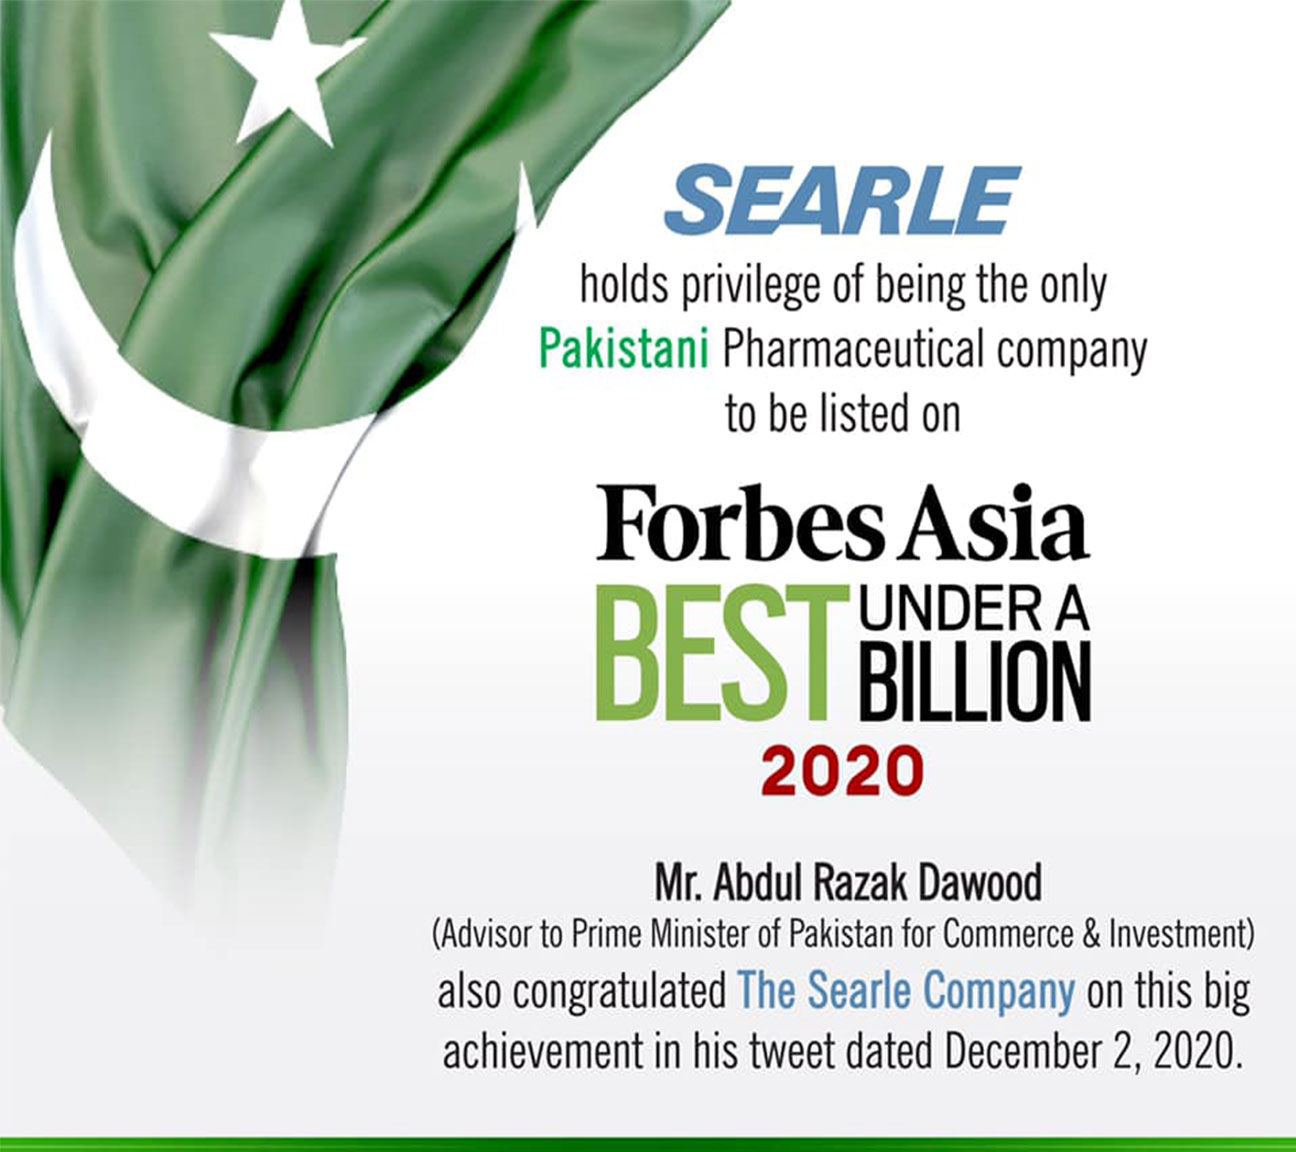 SEARLE IS THE ONLY PHARMACEUTICAL  COMPANY LISTED IN THE FORBES 2020 “ASIA’S BEST UNDER A BILLION“ LIST